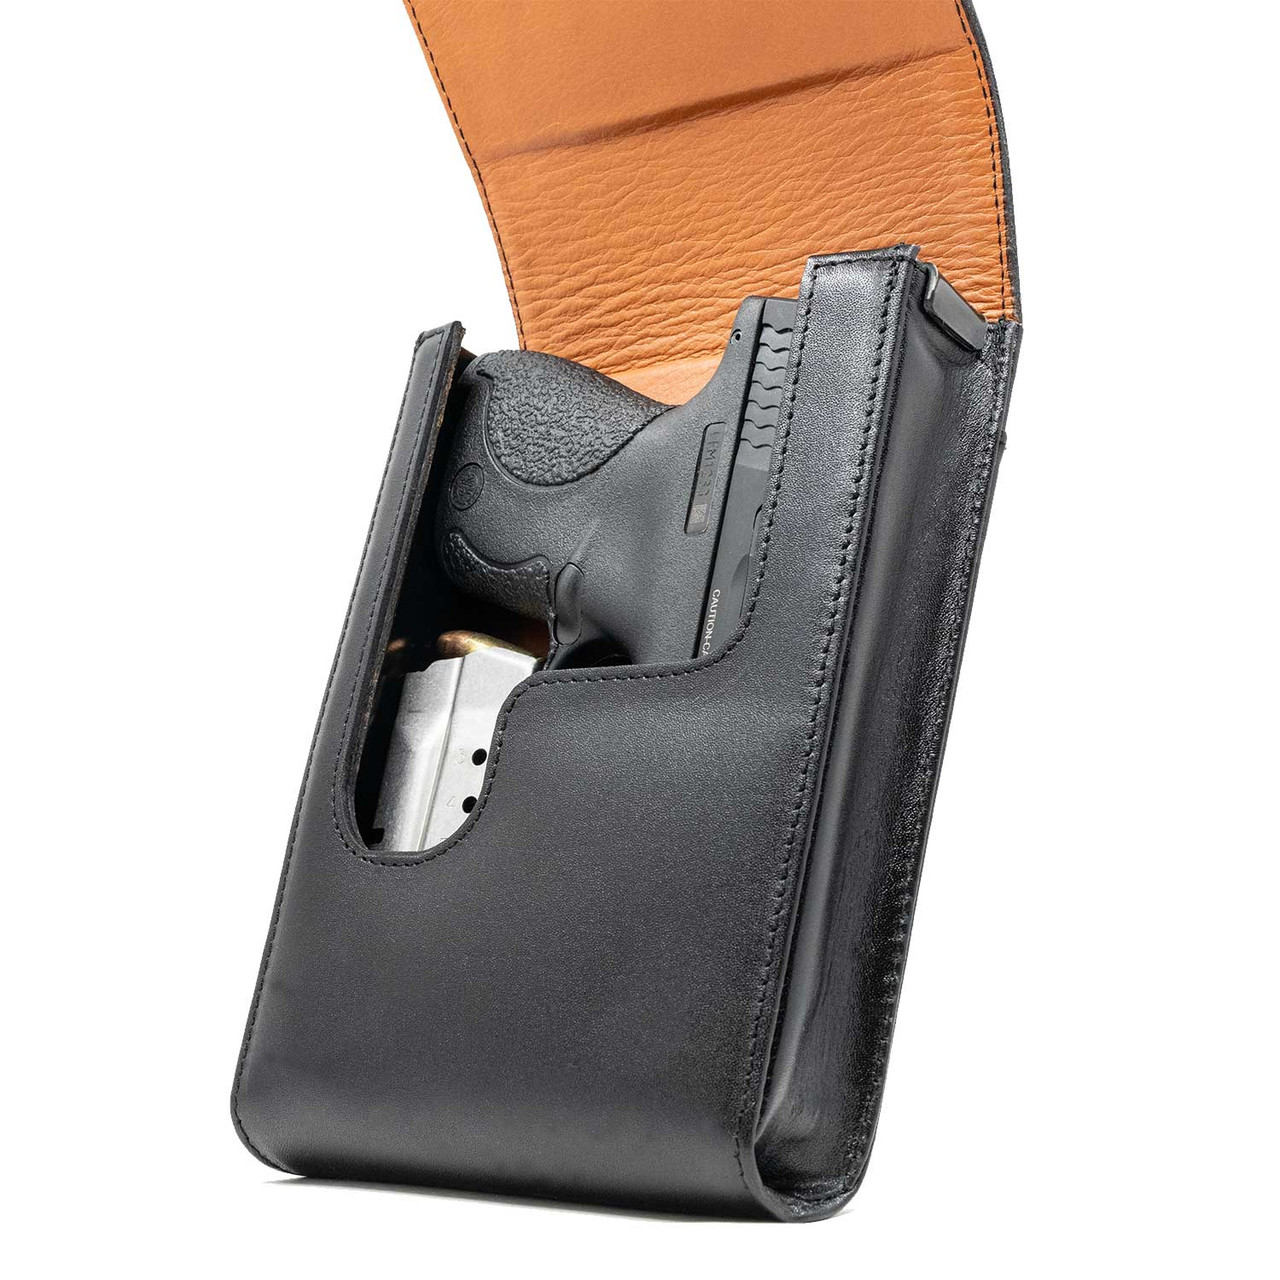 The Colt Cobra .38 Special Xtra Mag Black Leather Holster